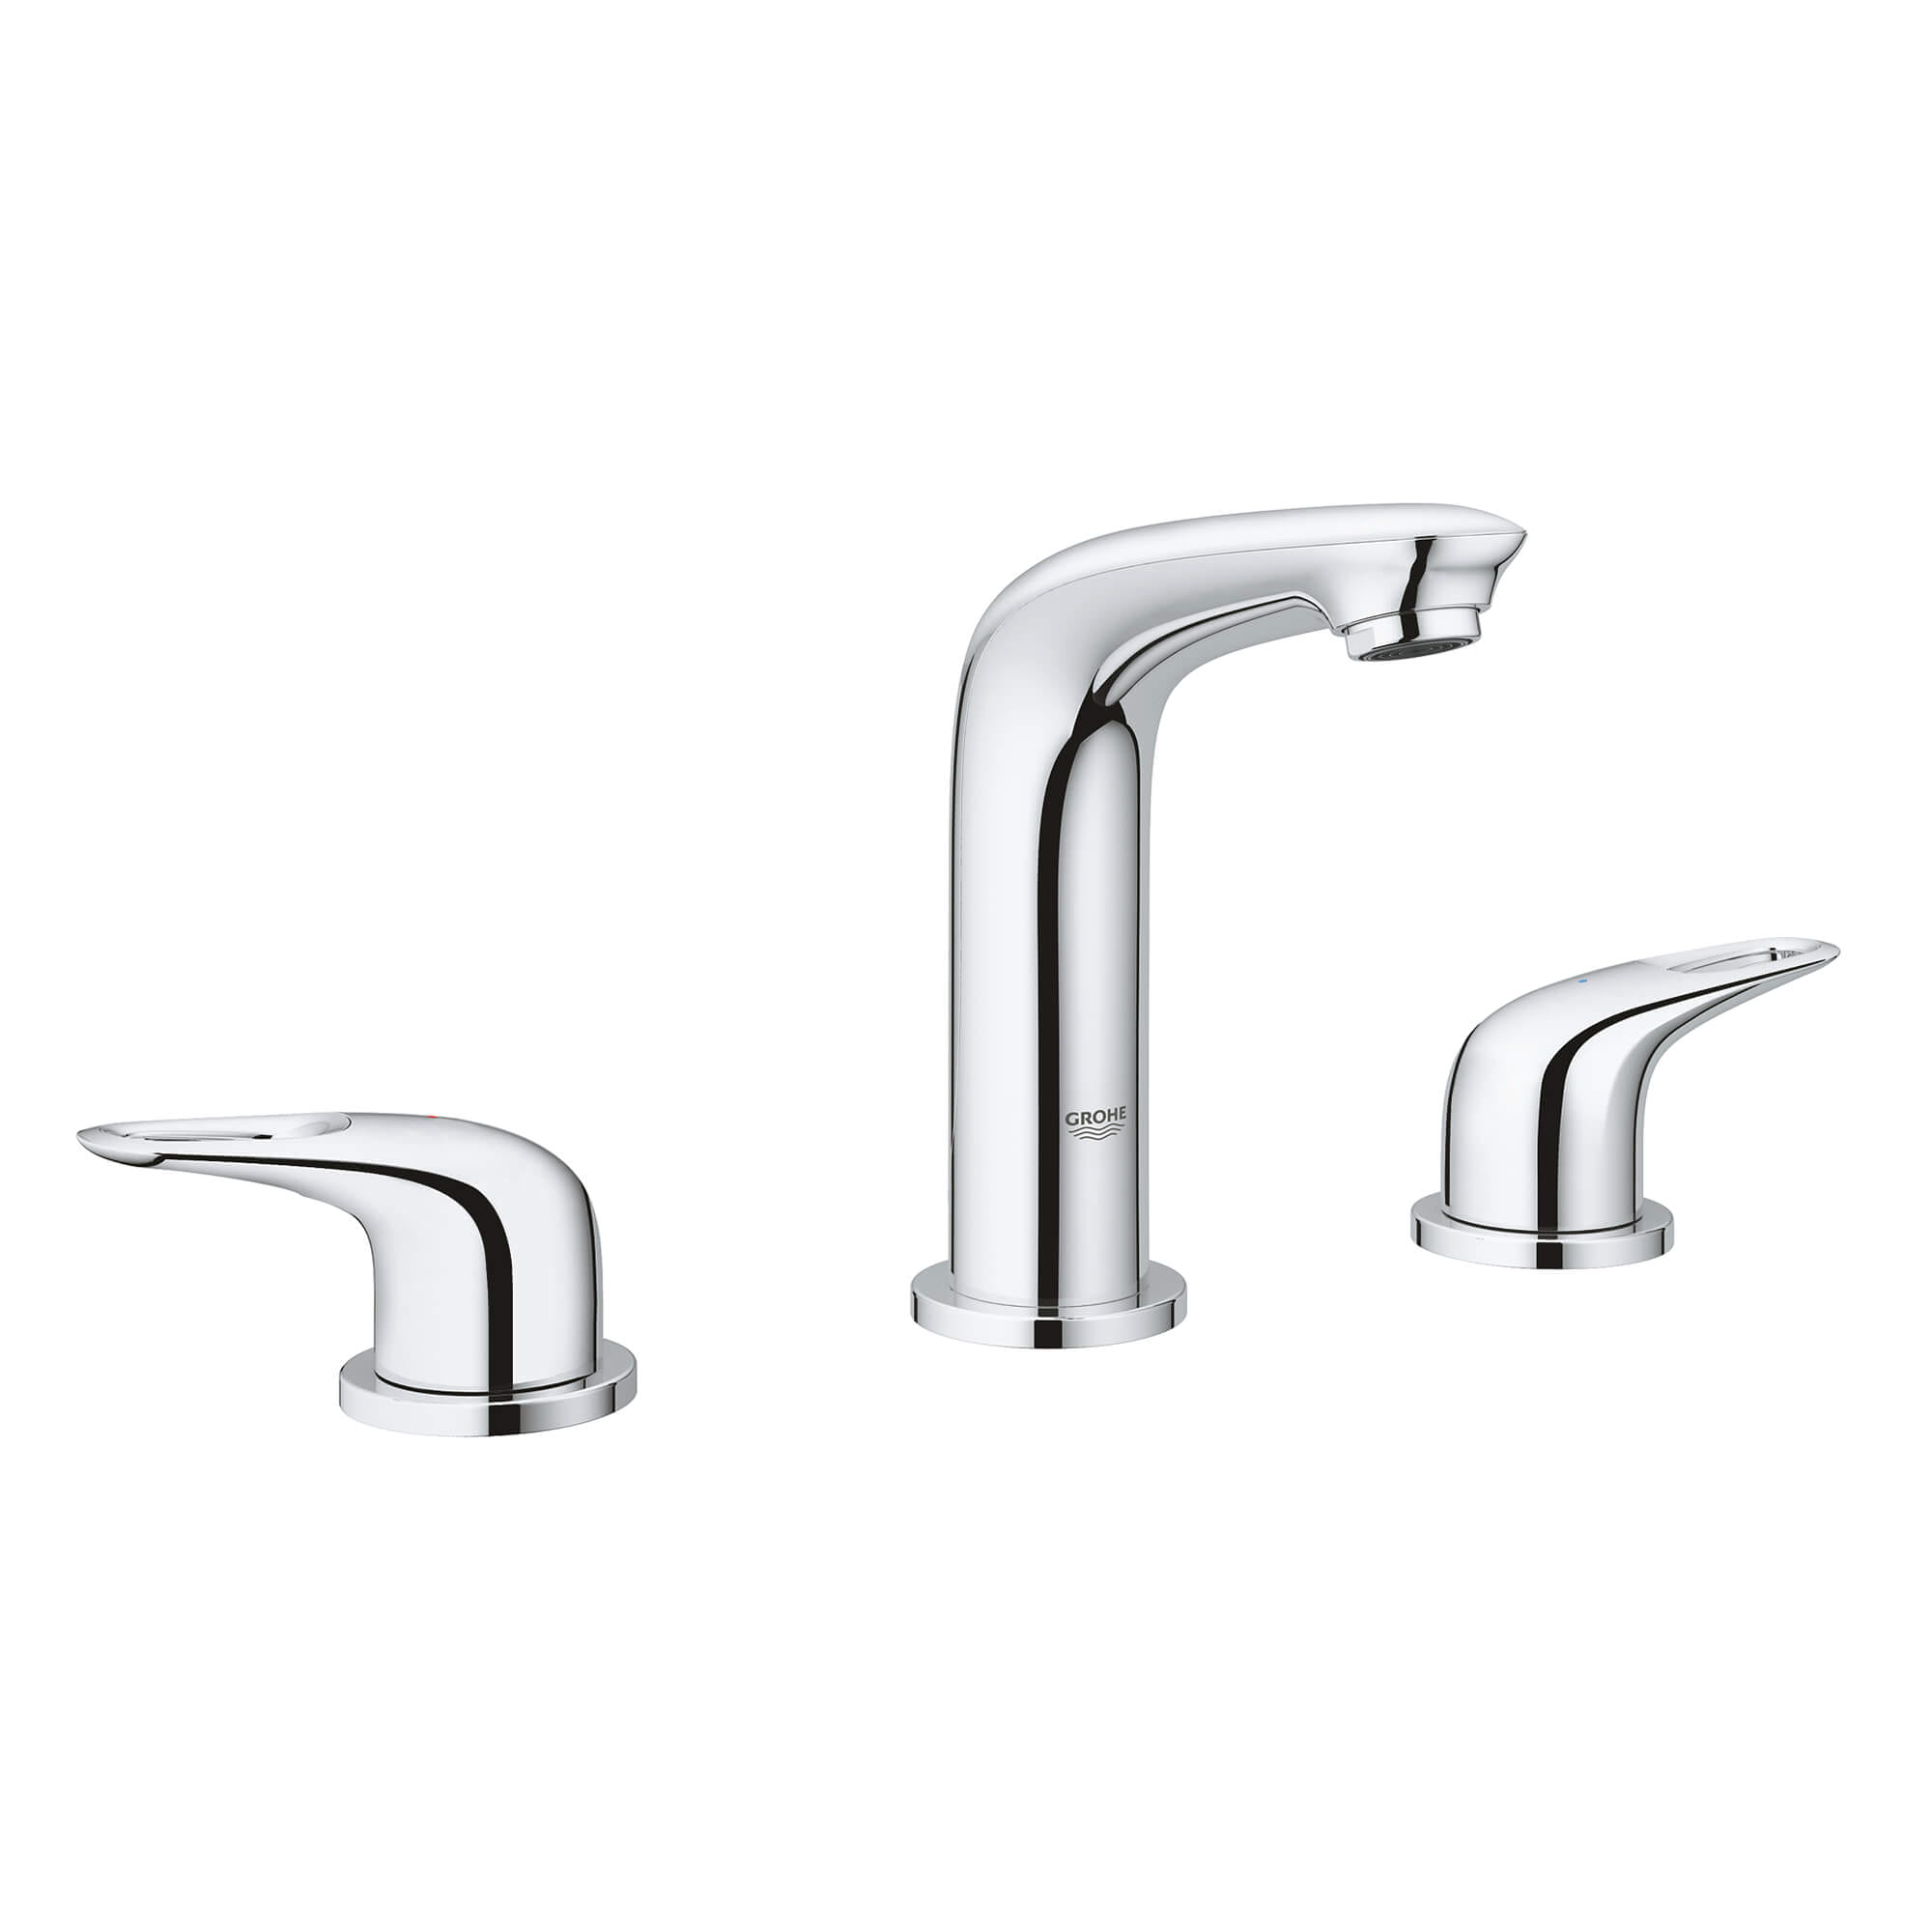 GROHE Grohe Basin Mixer Tap Eurostyle single lever Chrome 33561003 4005176334160 